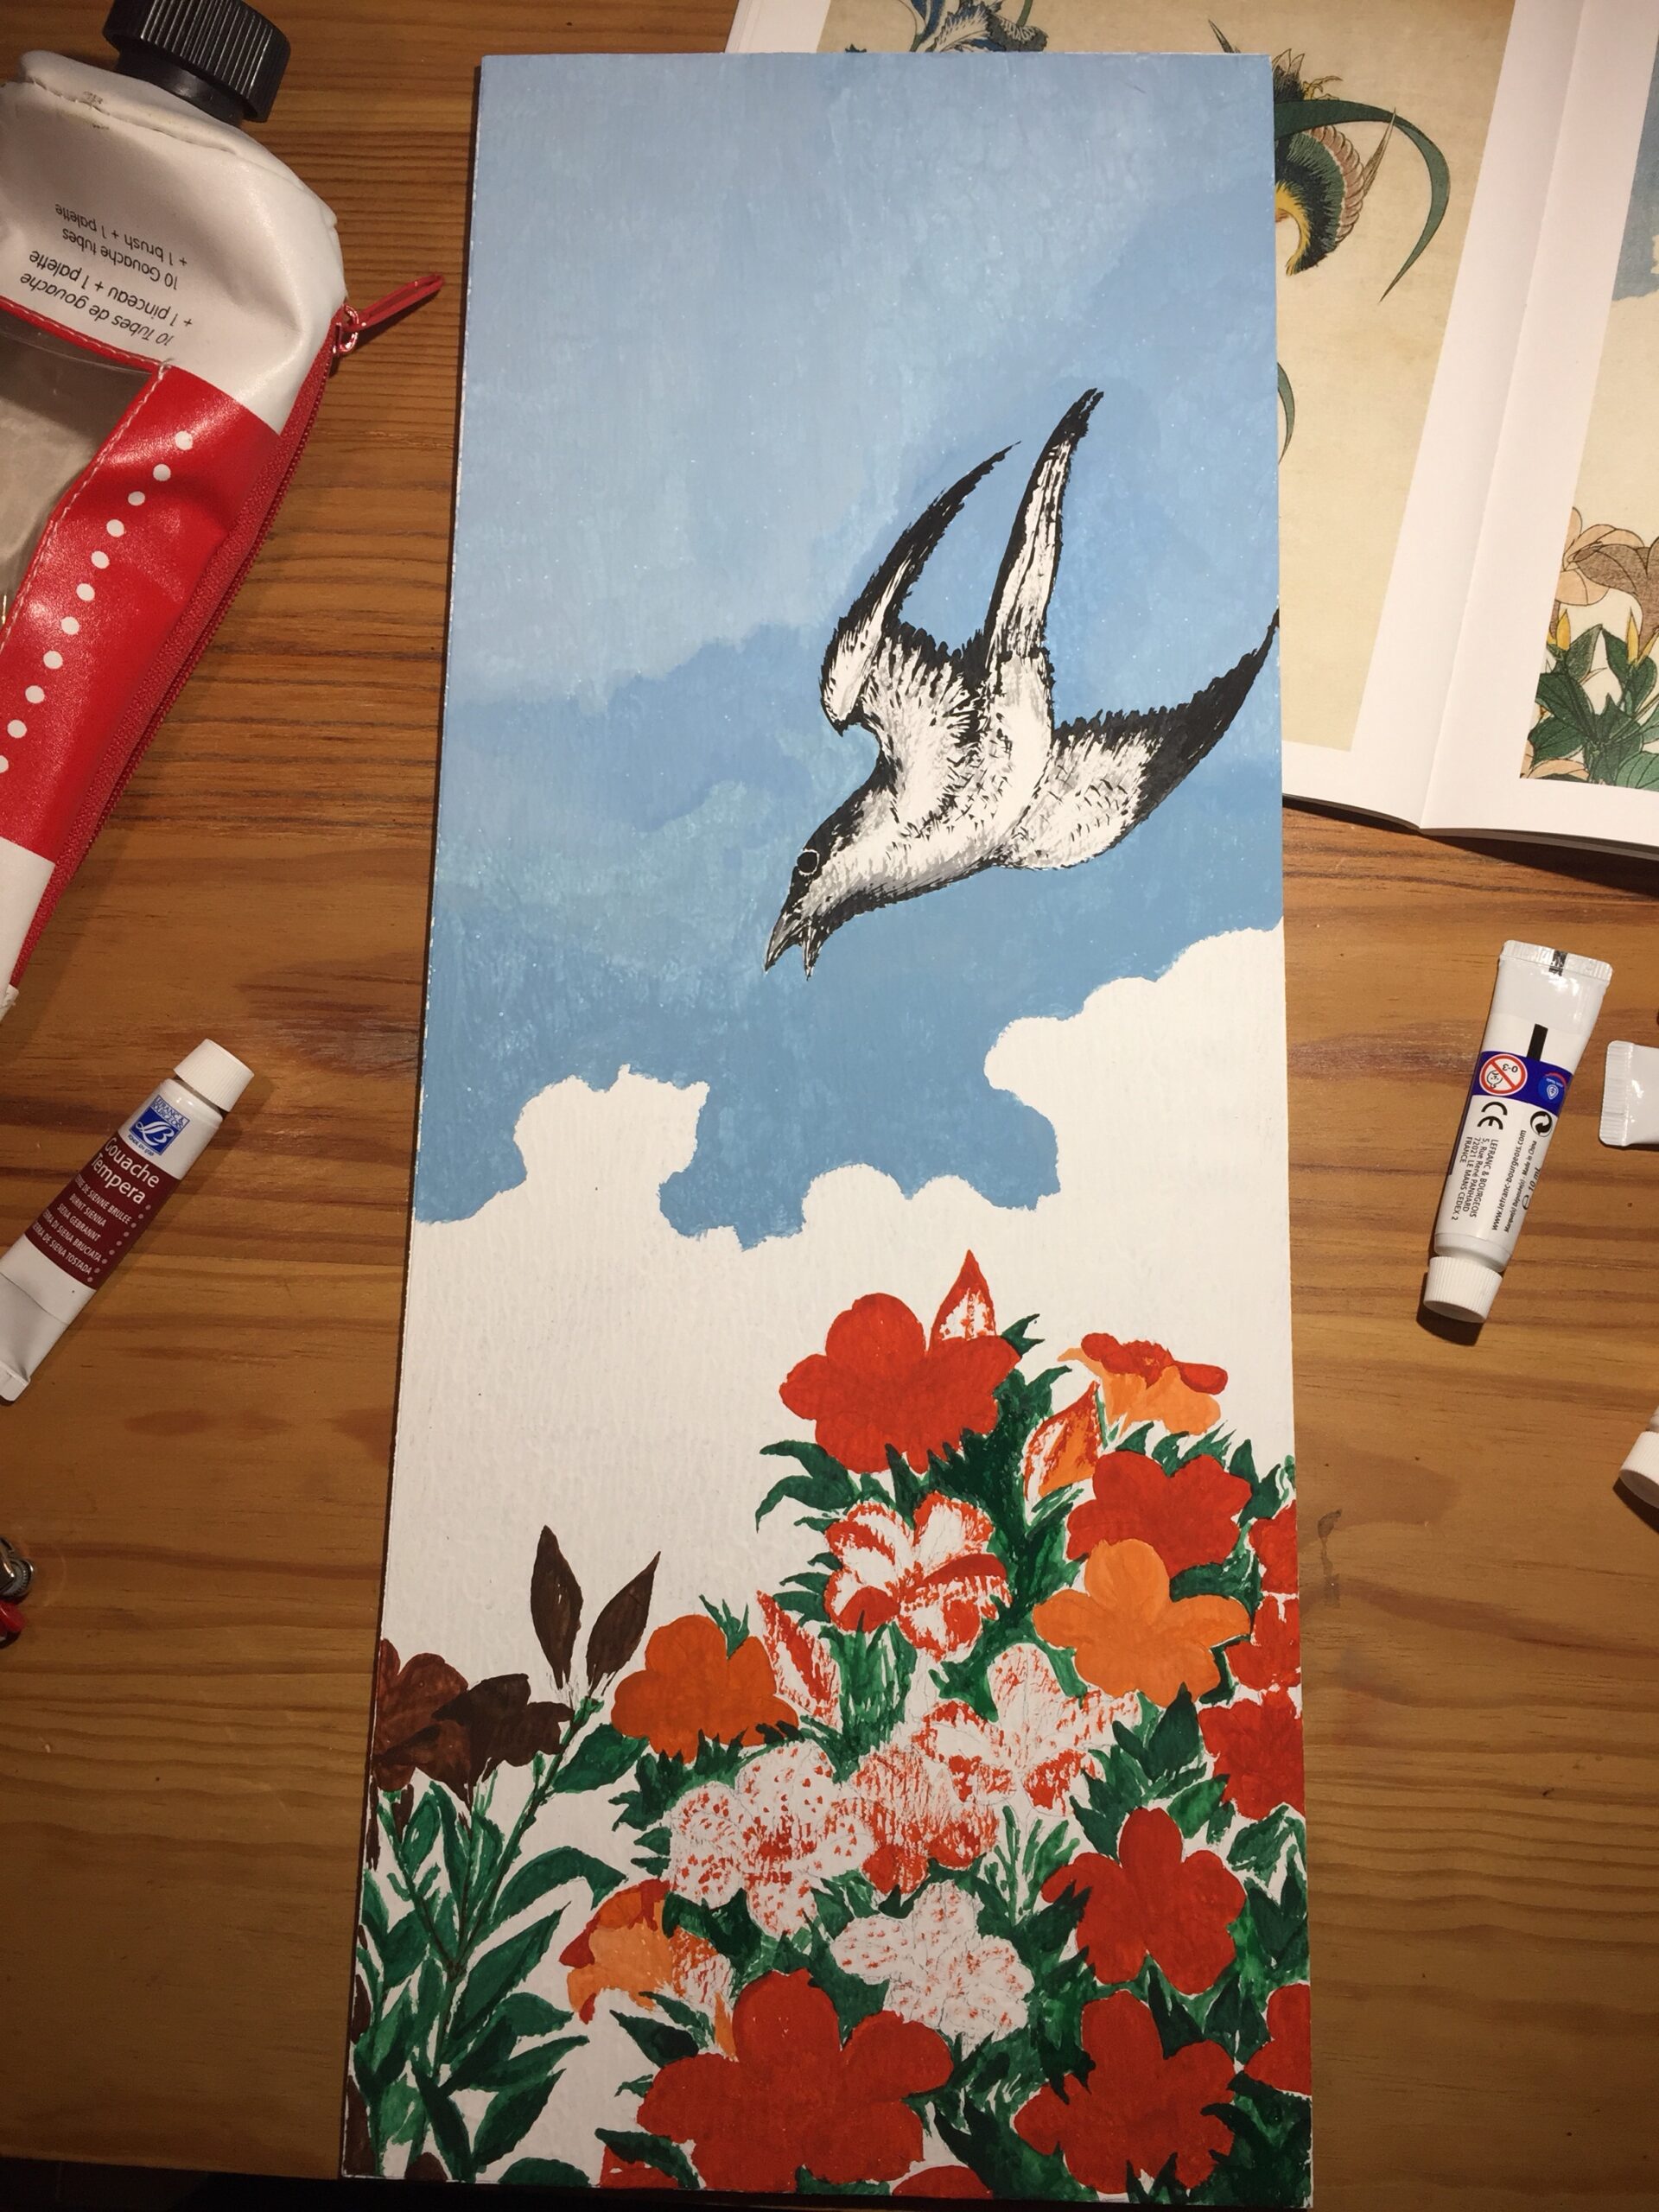 Board with both bird and azalea bush painted. Paint tubes are visible on the wooden table.